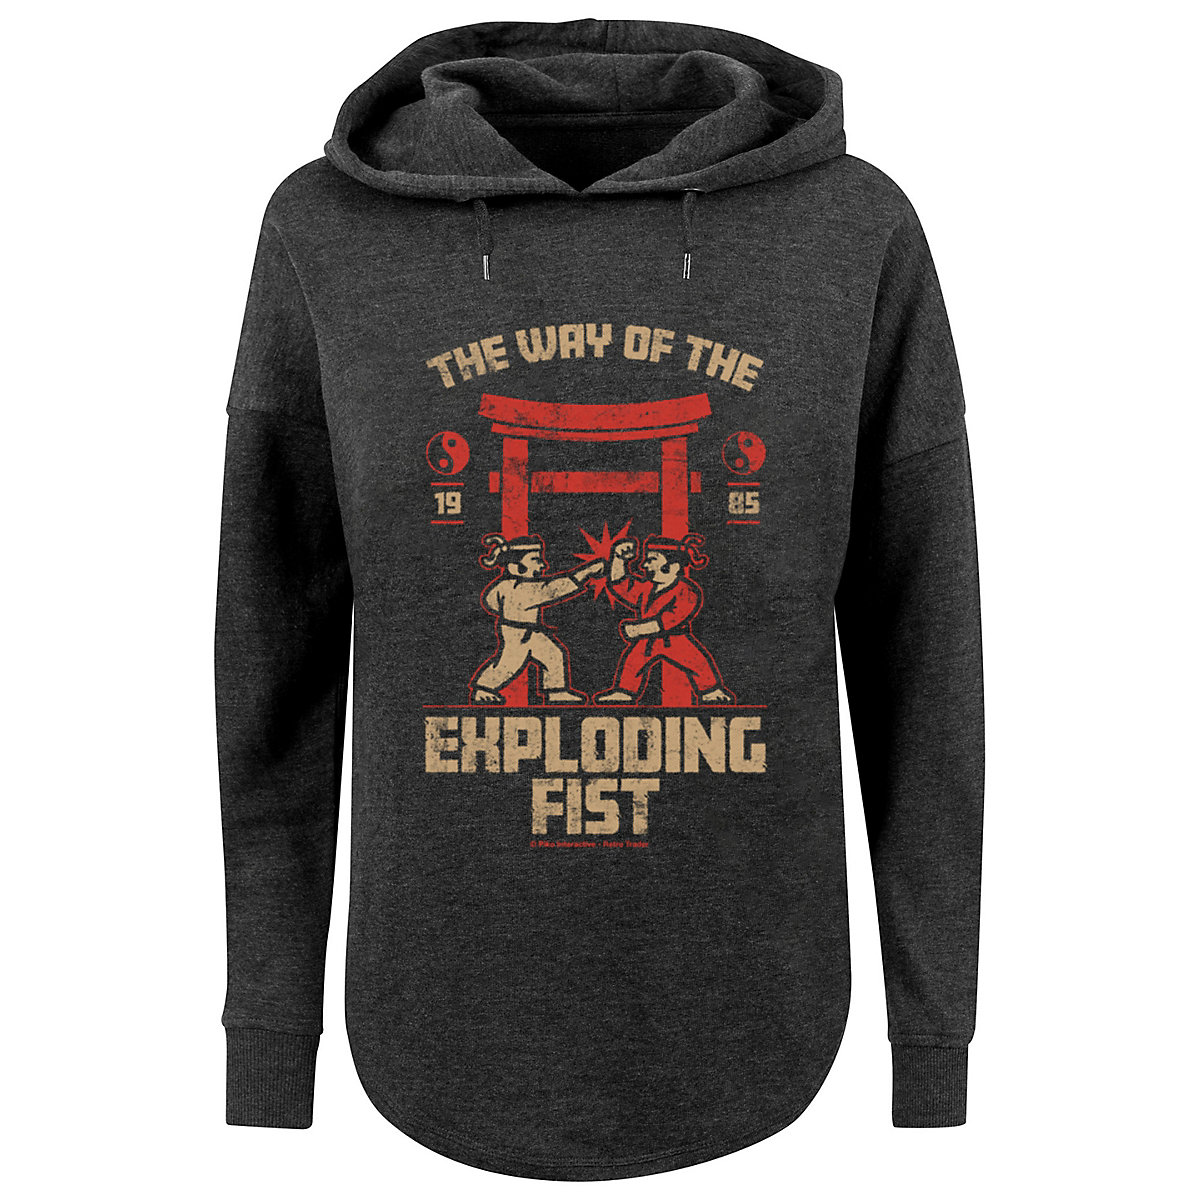 F4NT4STIC Retro Gaming The Way of the Exploding Fist Kapuzenpullover grau